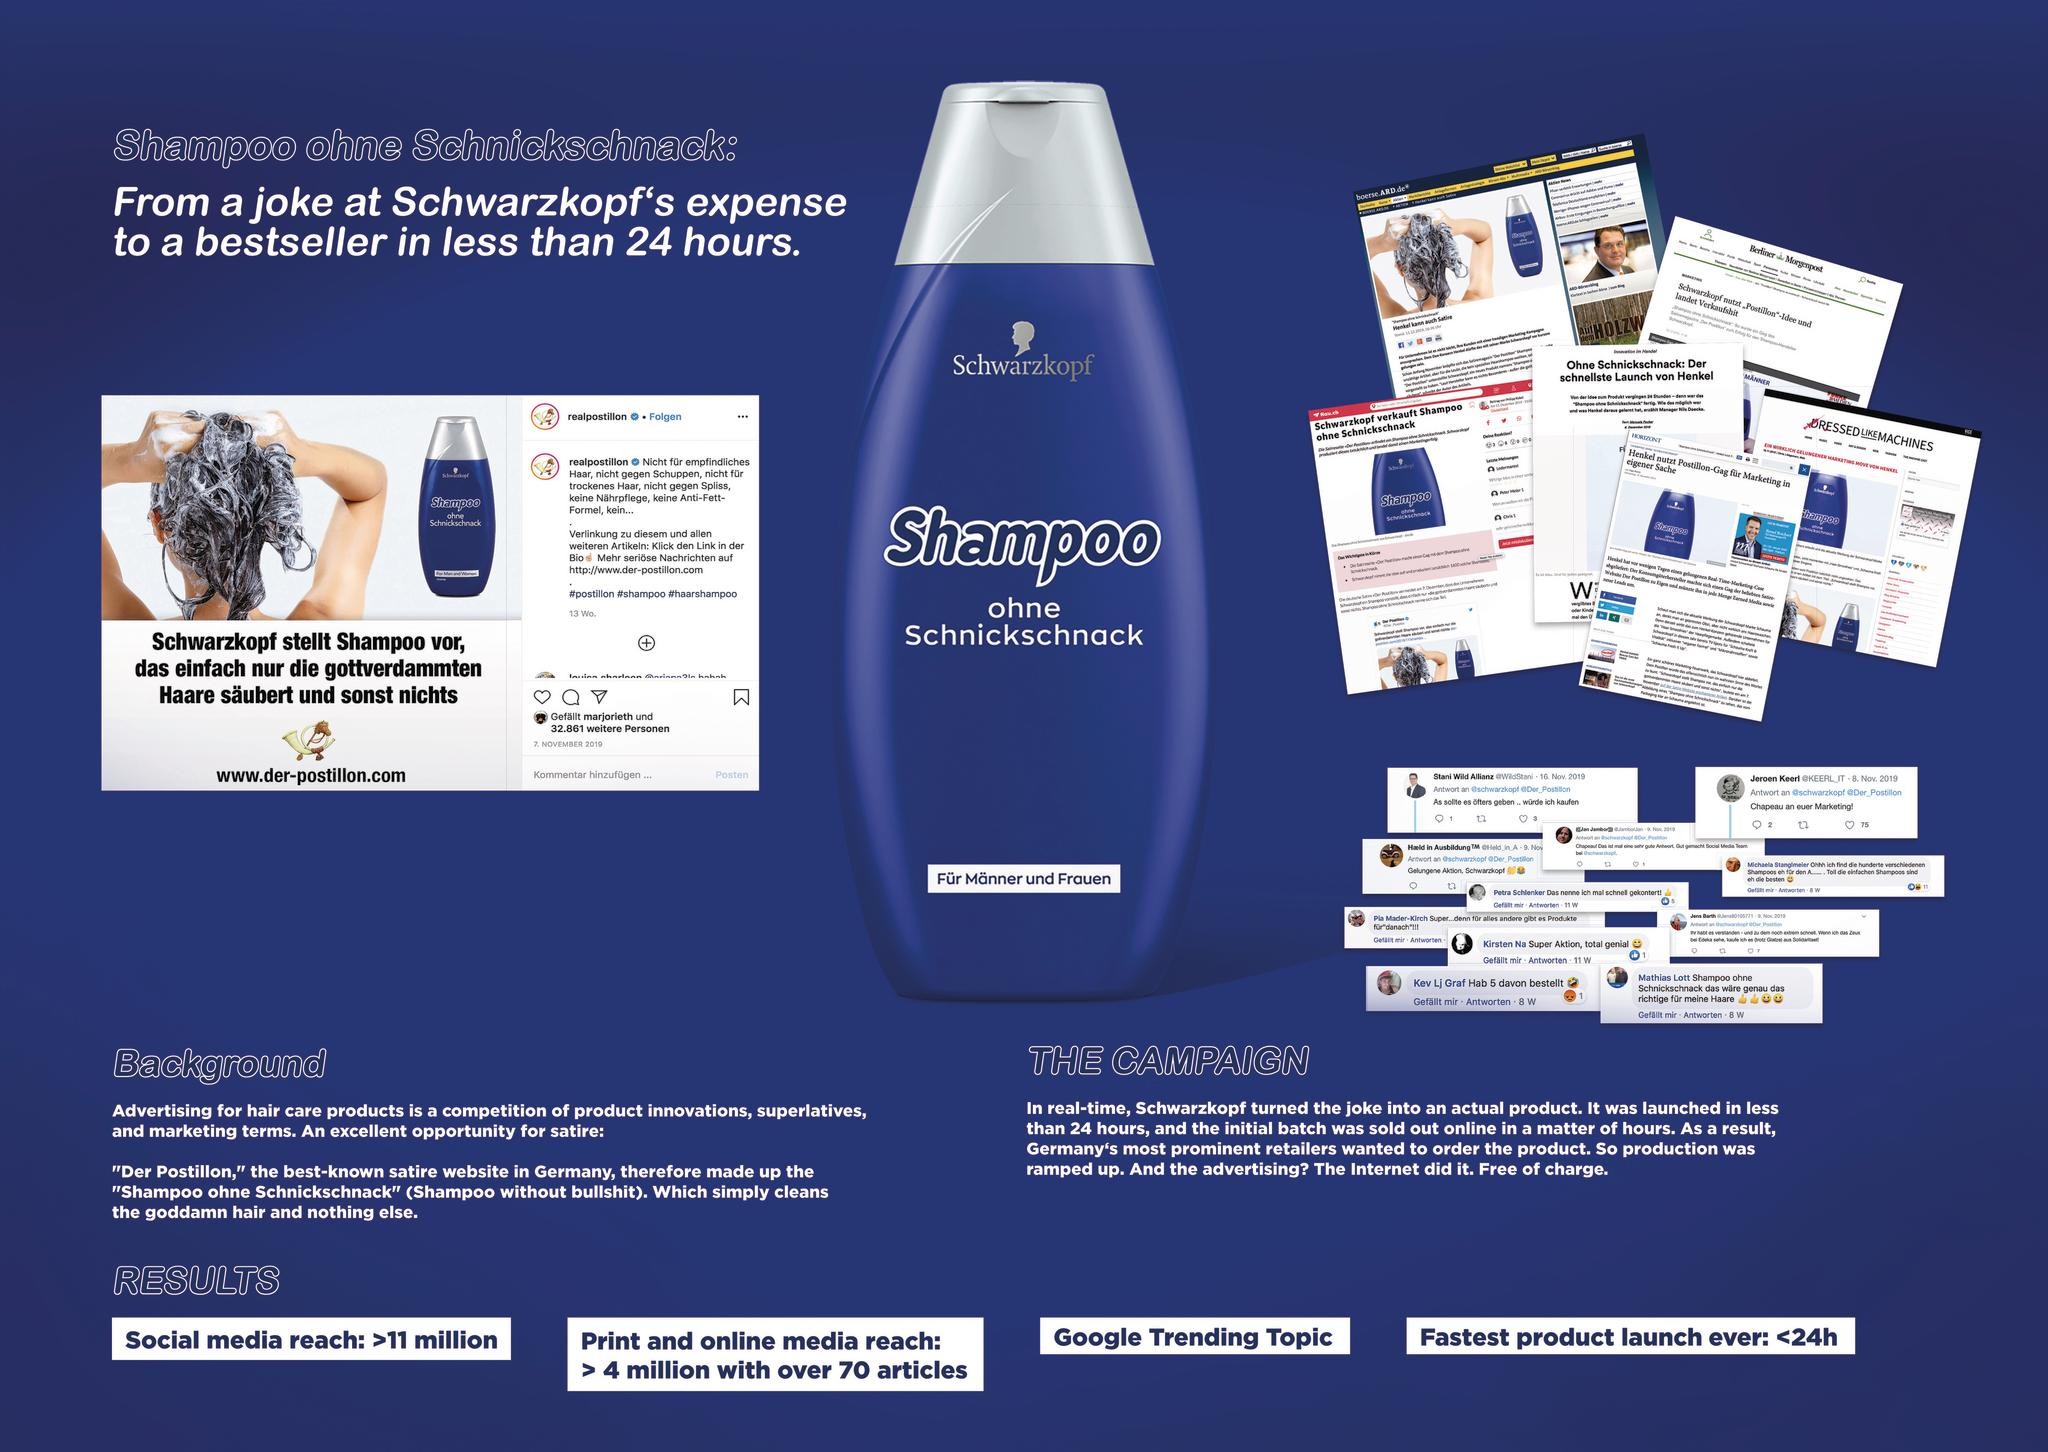 Shampoo without Schnick Schnack